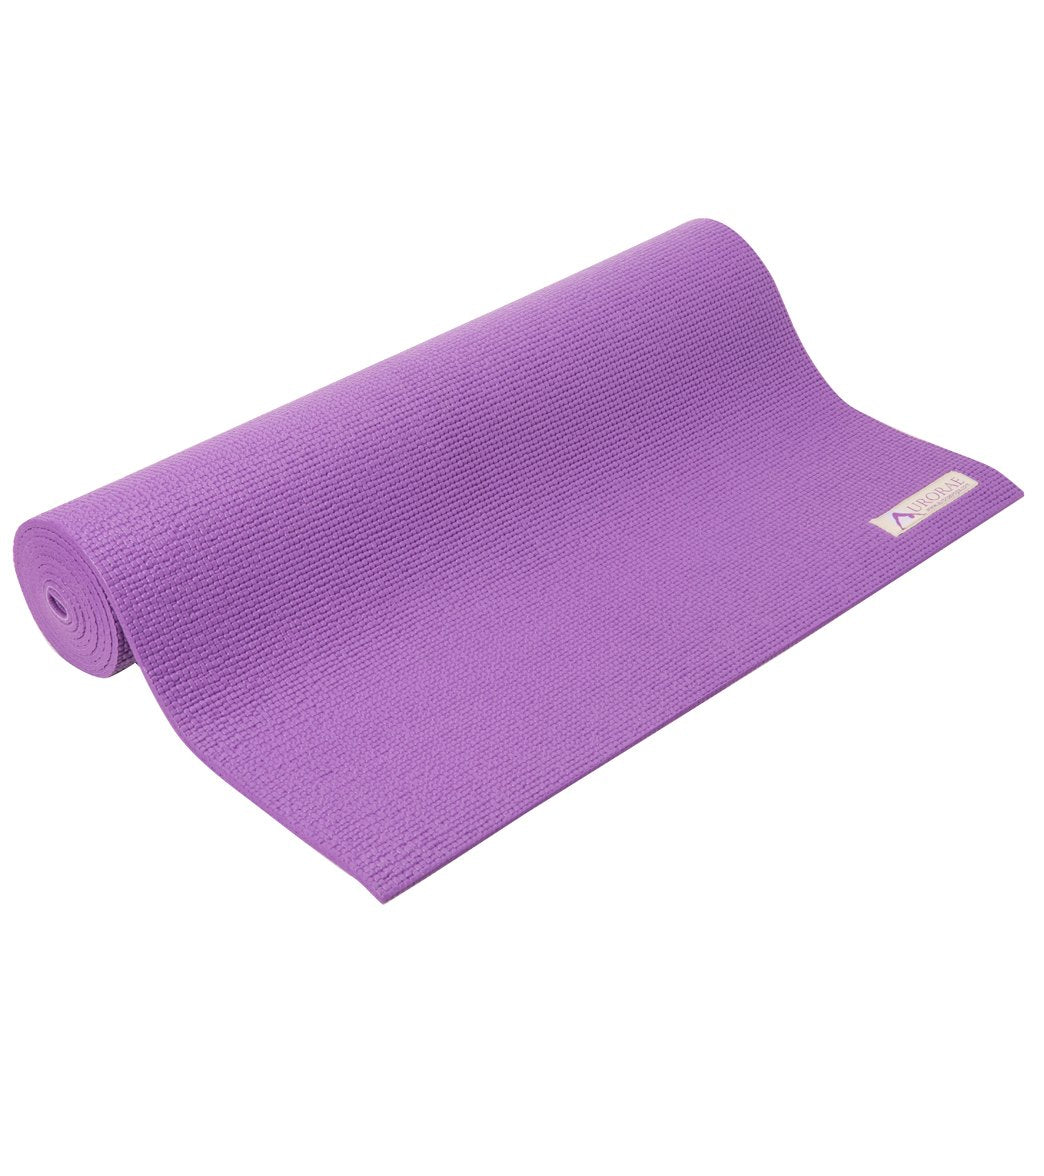 Extra thick yoga mats for men and women of size 3 to 4 mm mats for